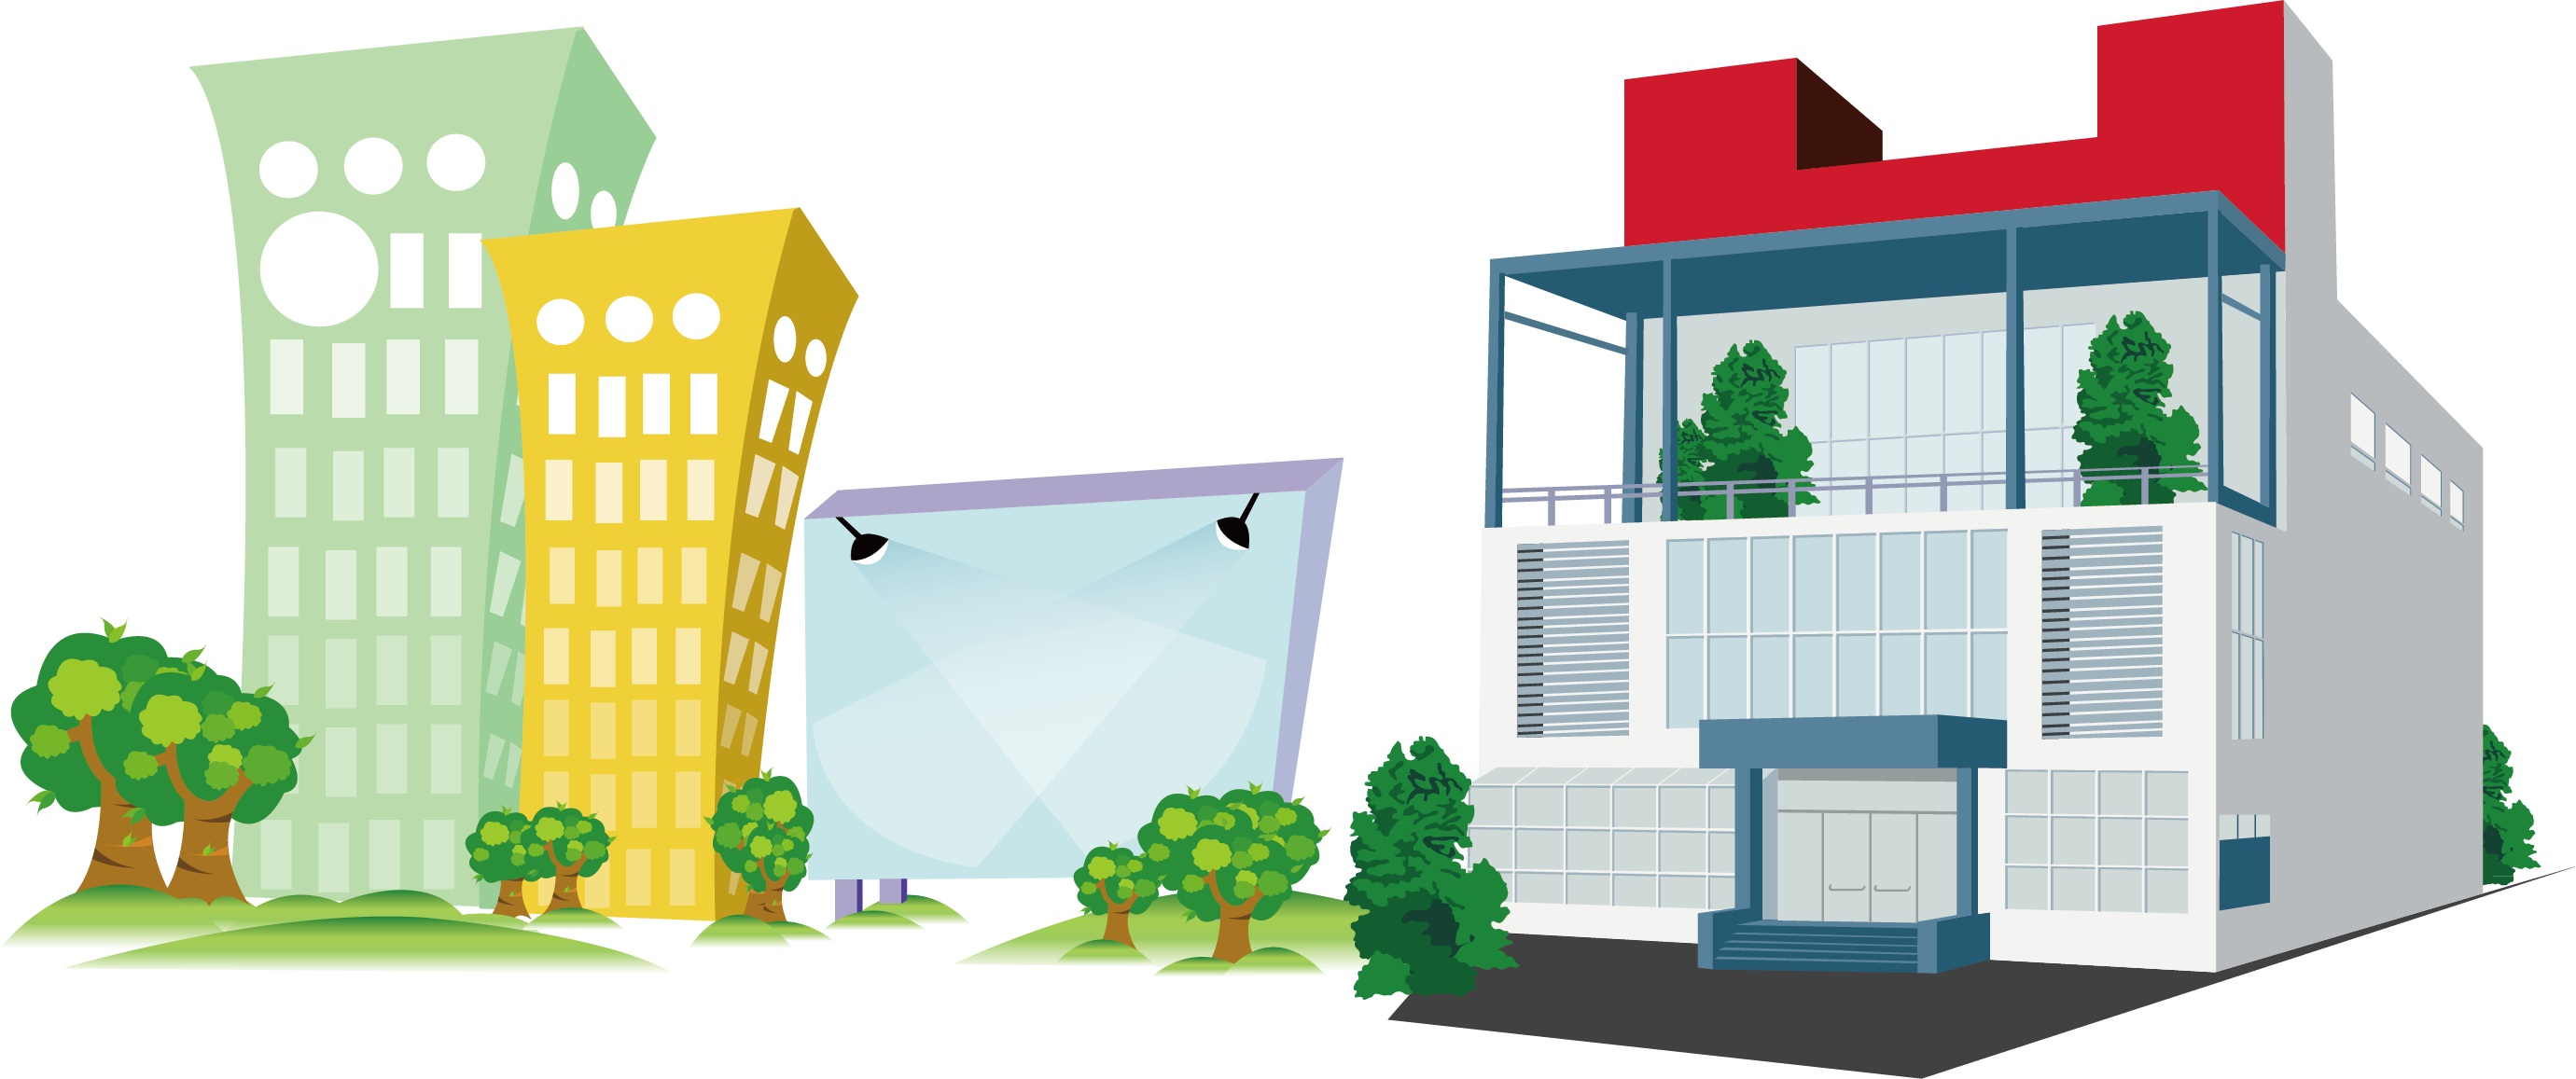 Building Company Cartoon Office Architecture Free PNG HQ Clipart